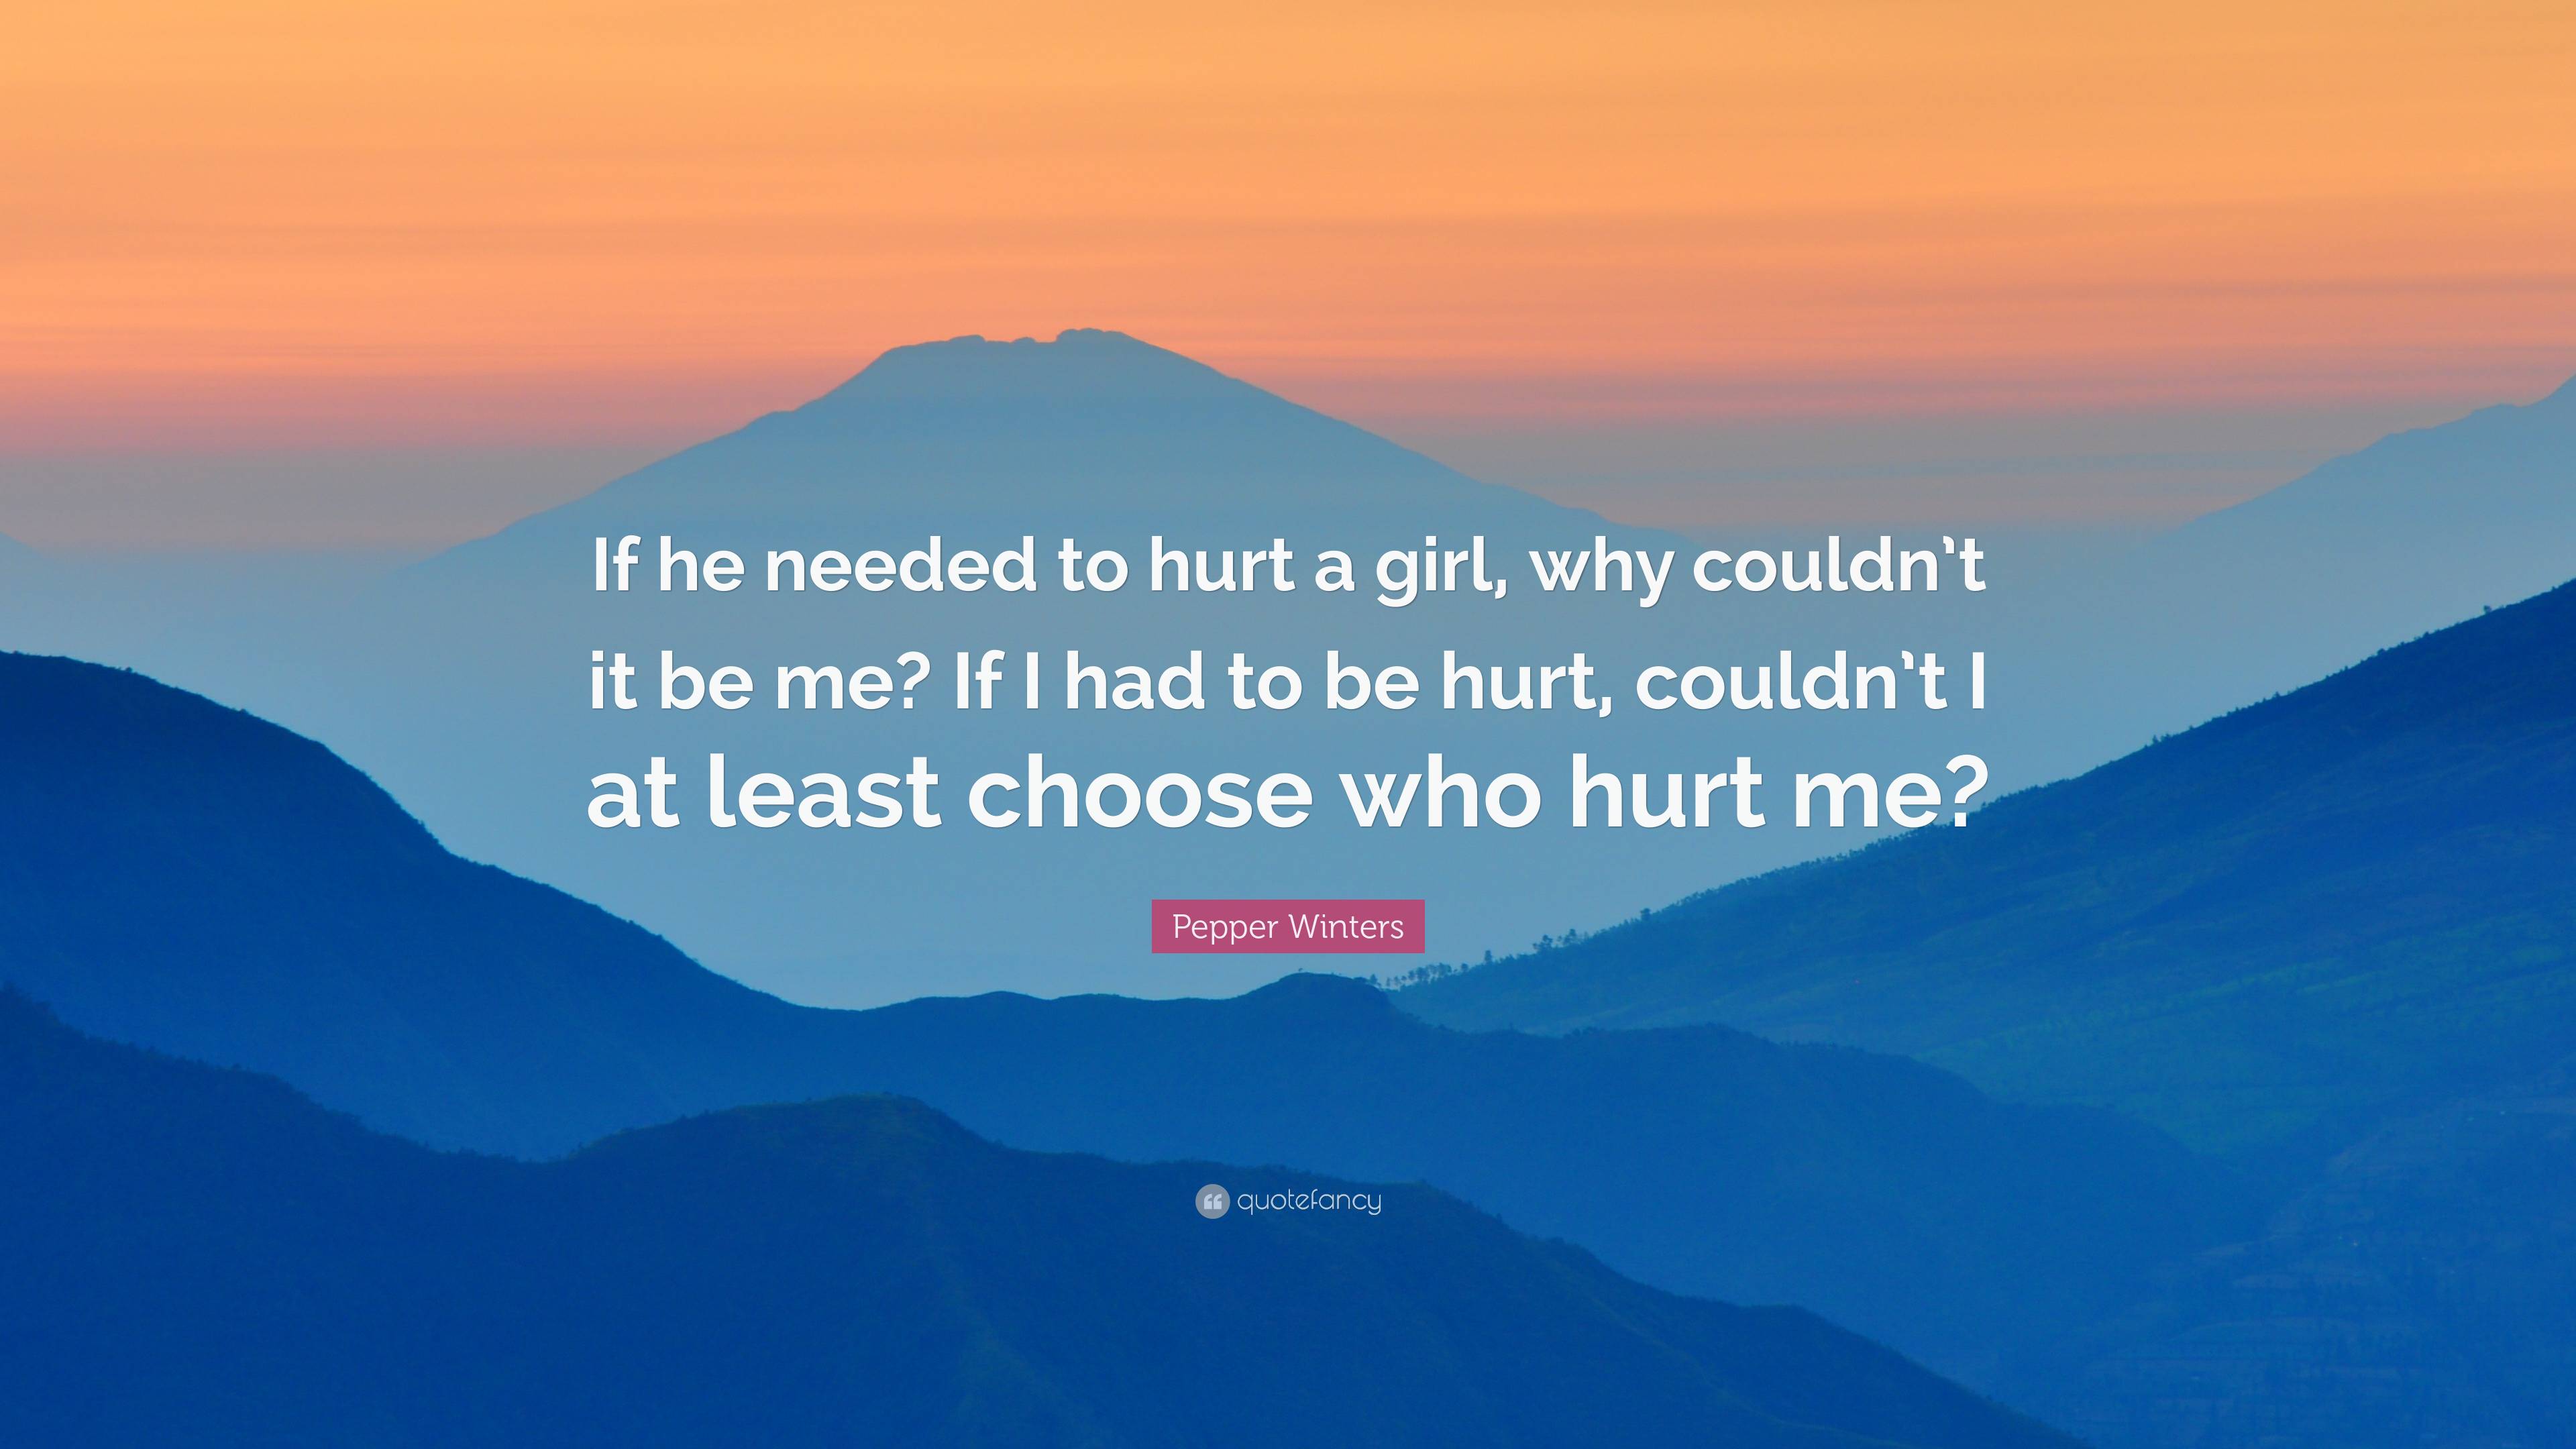 Pepper Winters Quote: “If he needed to hurt a girl, why couldn’t it be ...